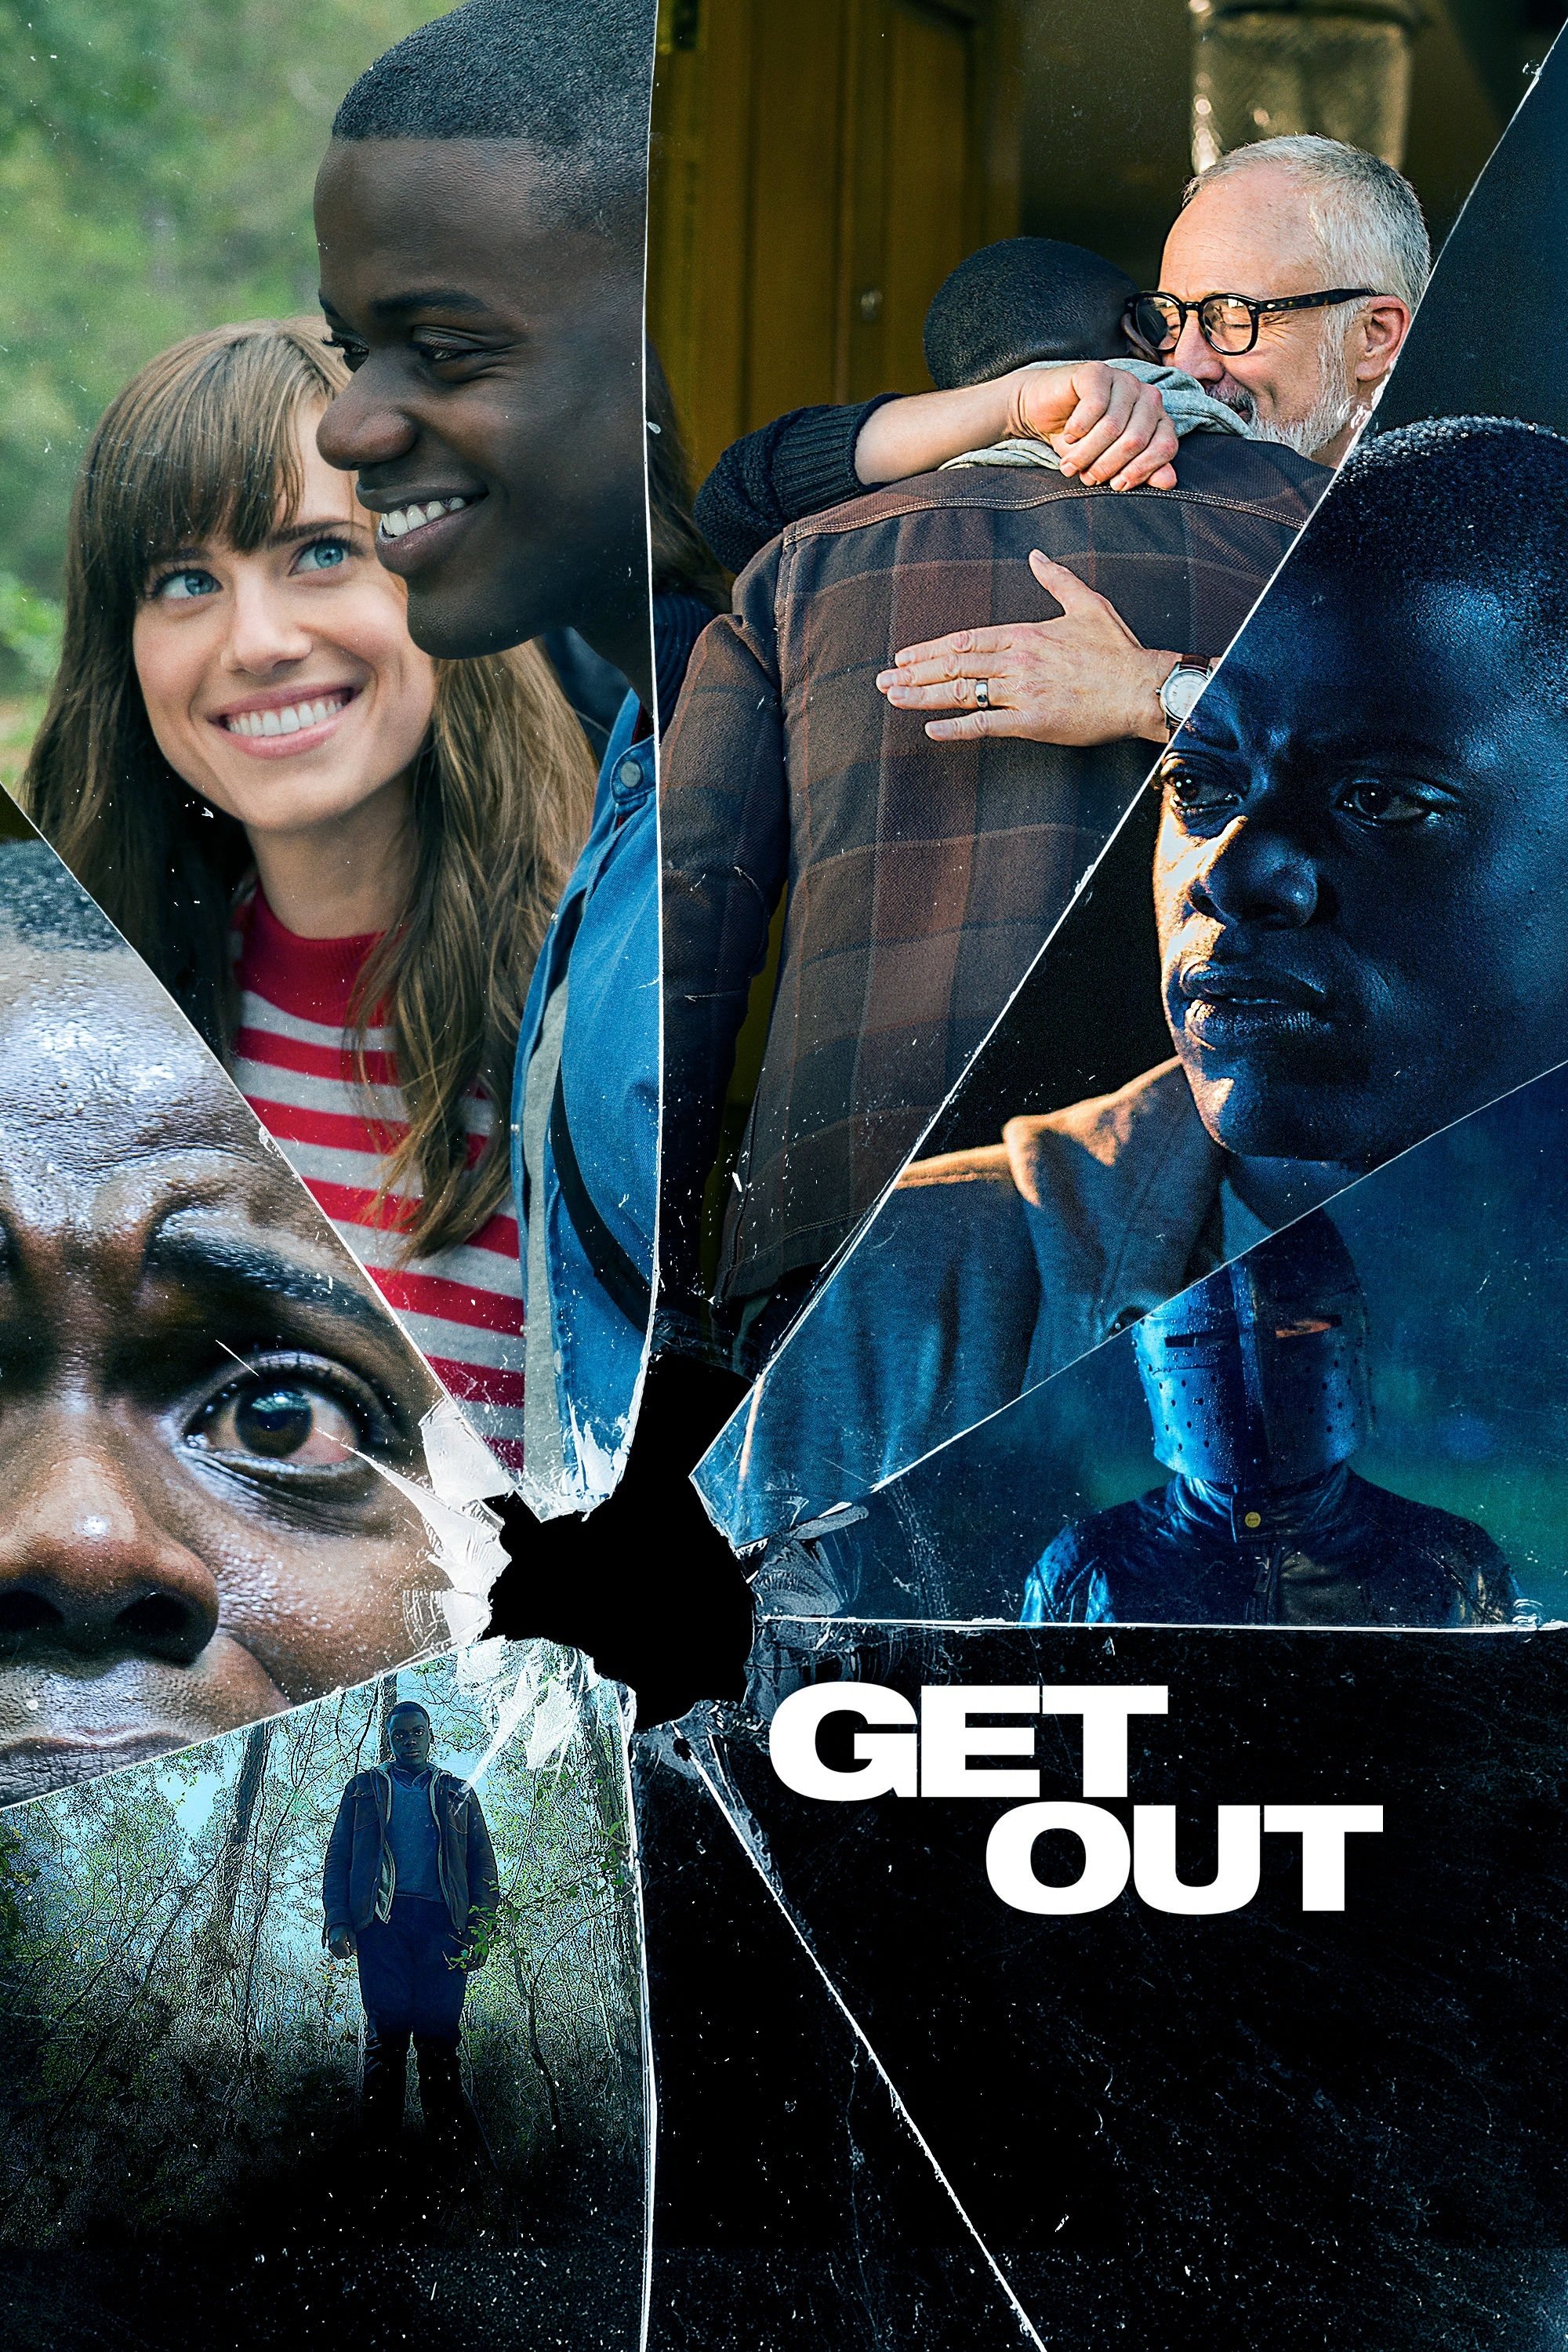 Poster for the movie "Get Out"